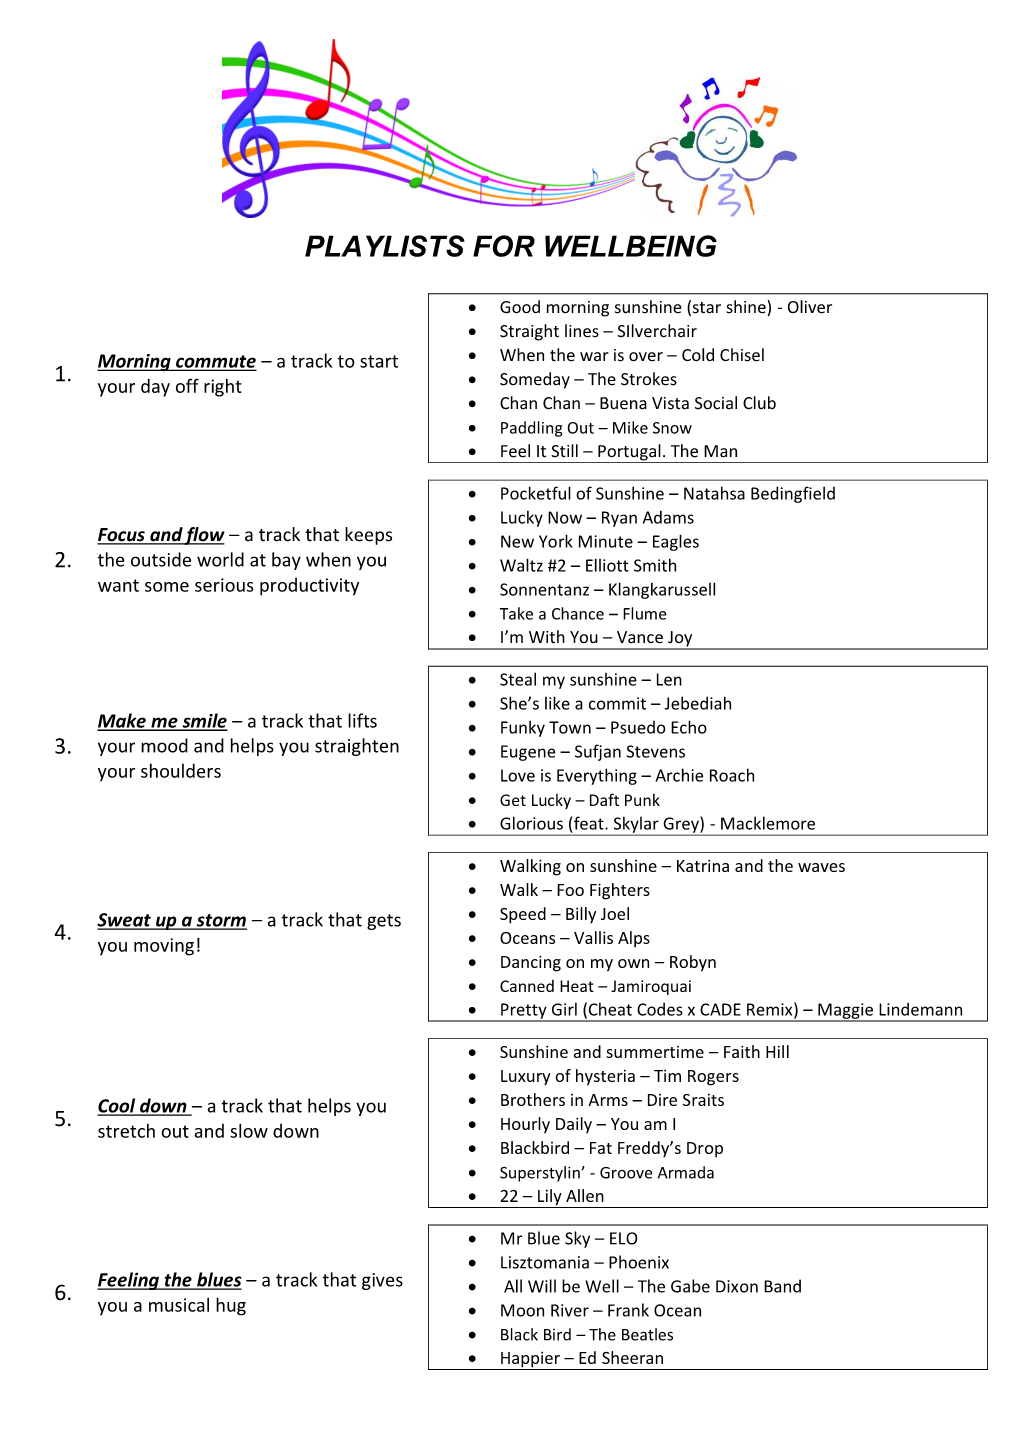 Playlists for Wellbeing